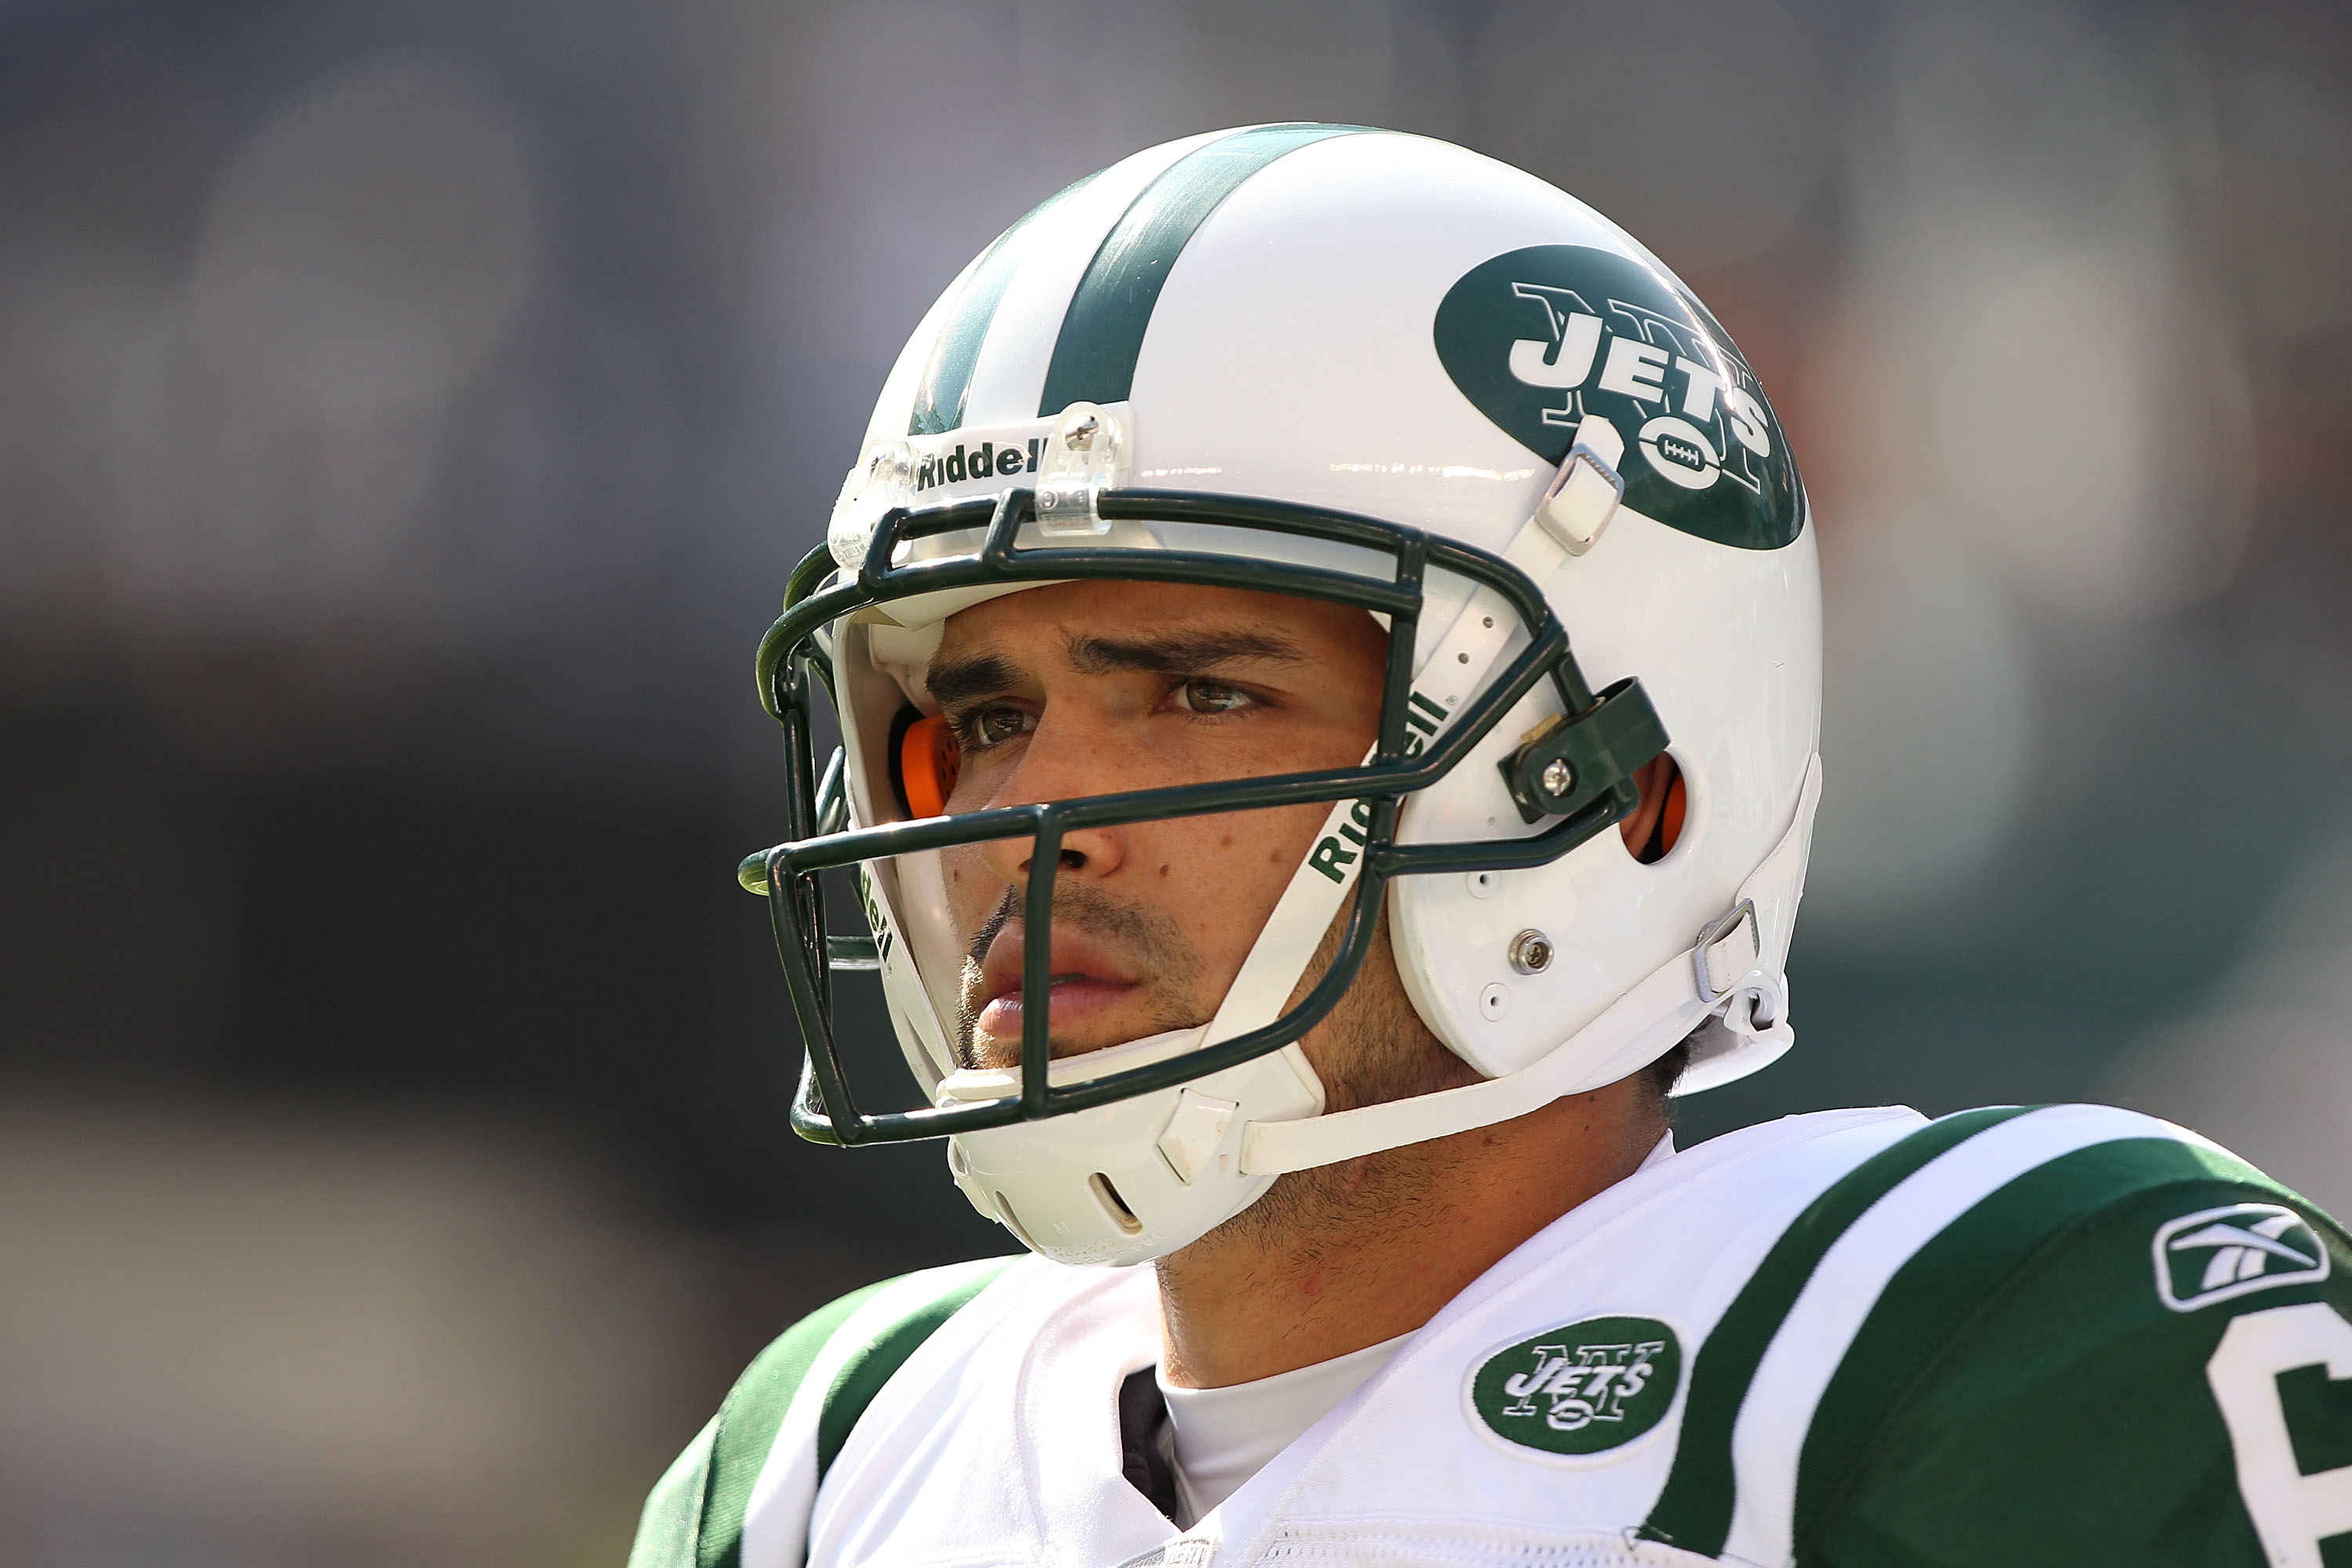 EAST RUTHERFORD, NJ - SEPTEMBER 19:  Mark Sanchez #6 of the New York Jets looks on during warmups prior to the game against the New England Patriots on September 19, 2010 at the New Meadowlands Stadium  in East Rutherford, New Jersey.  (Photo by Al Bello/